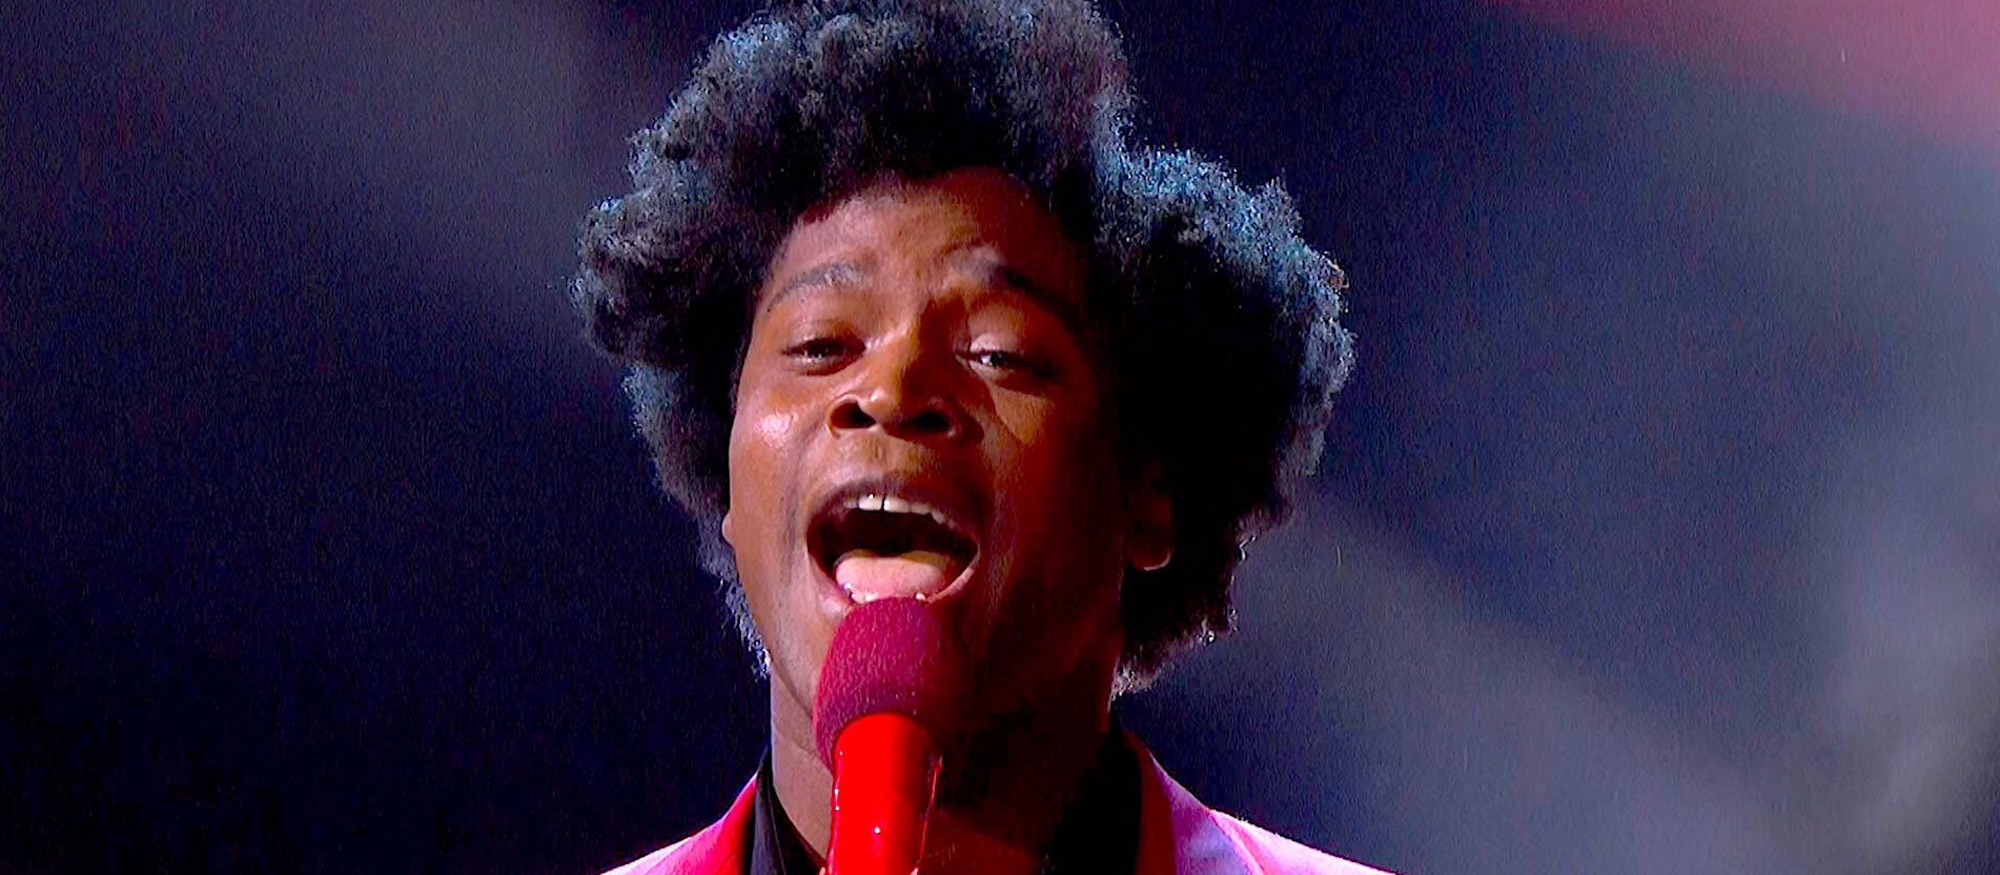 AGT’s Jimmie Herrod Wows Judges with Rendition of ‘What A Wonderful World’